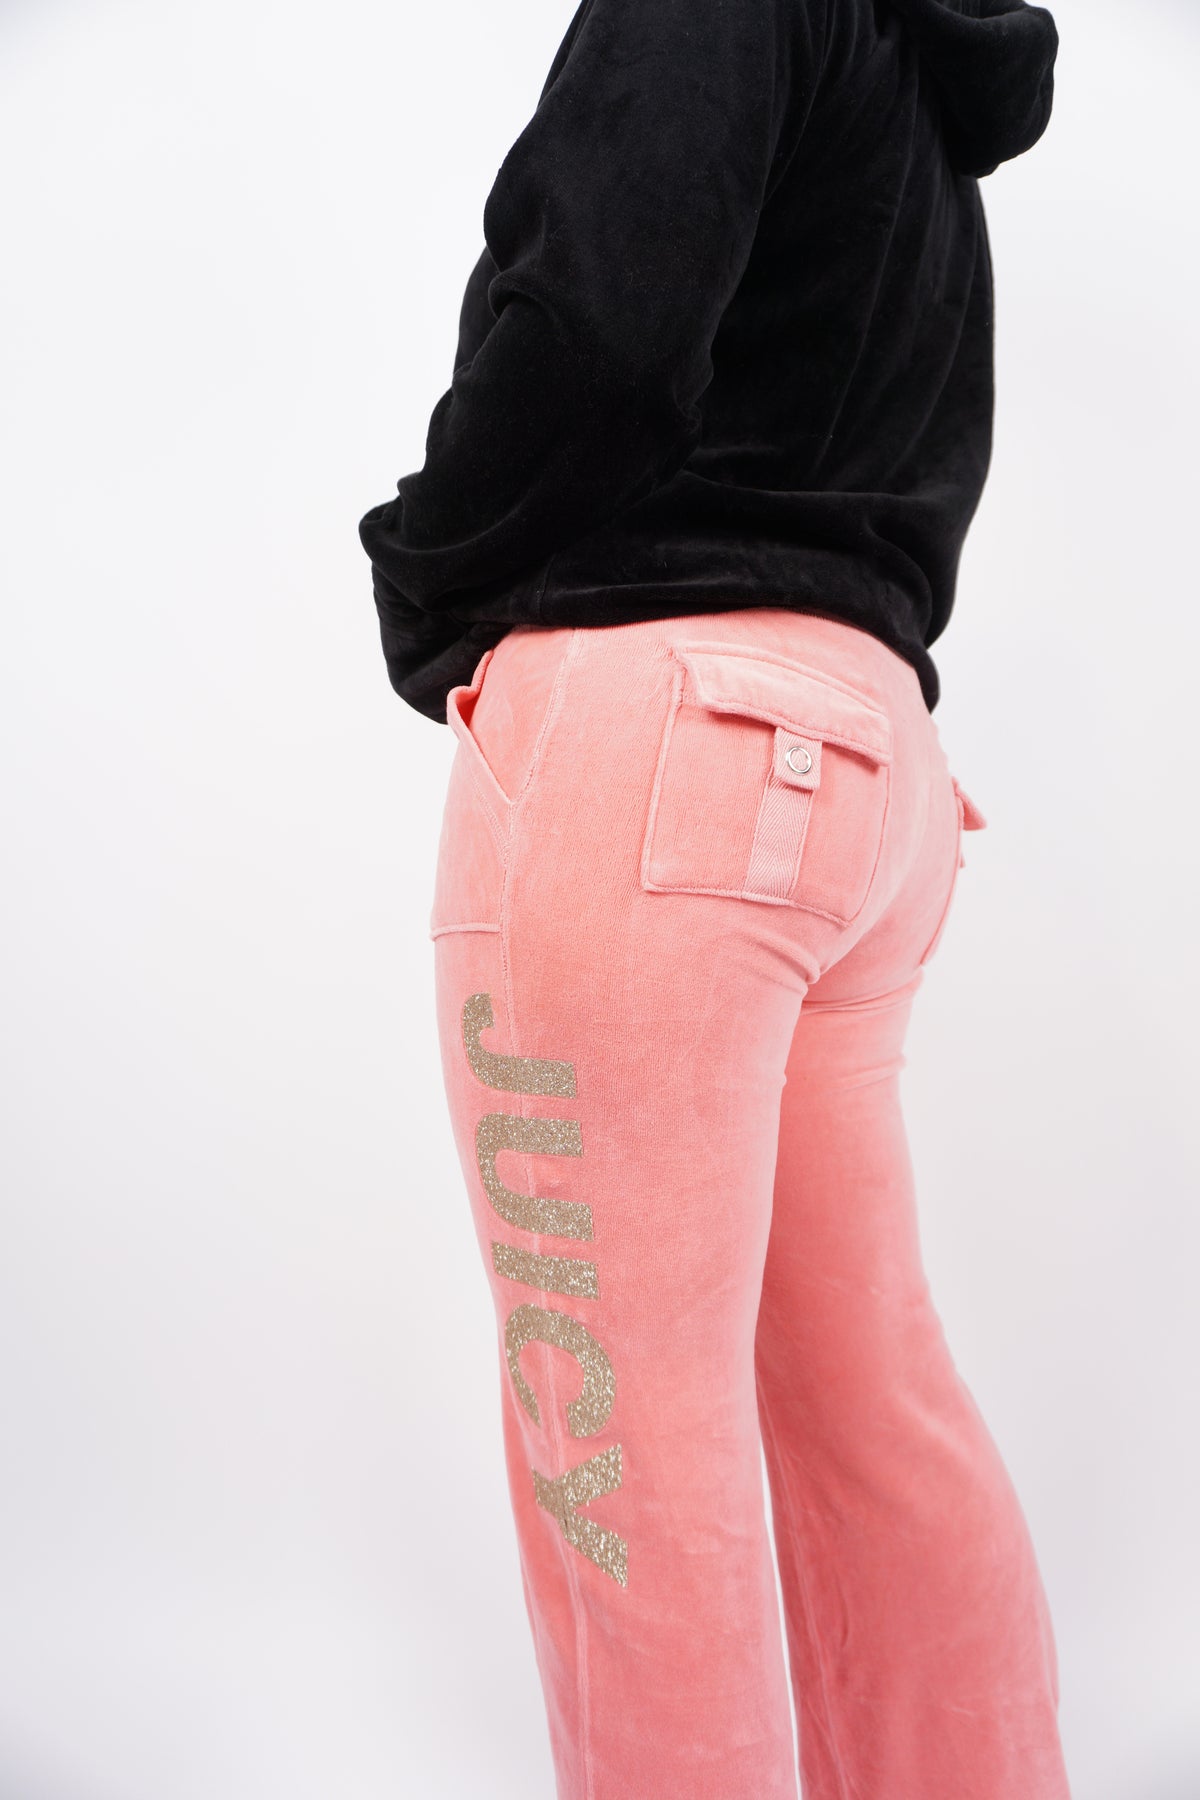 Shop Juicy Couture Velour Leggings 110008842-X0592 pink | SNIPES USA